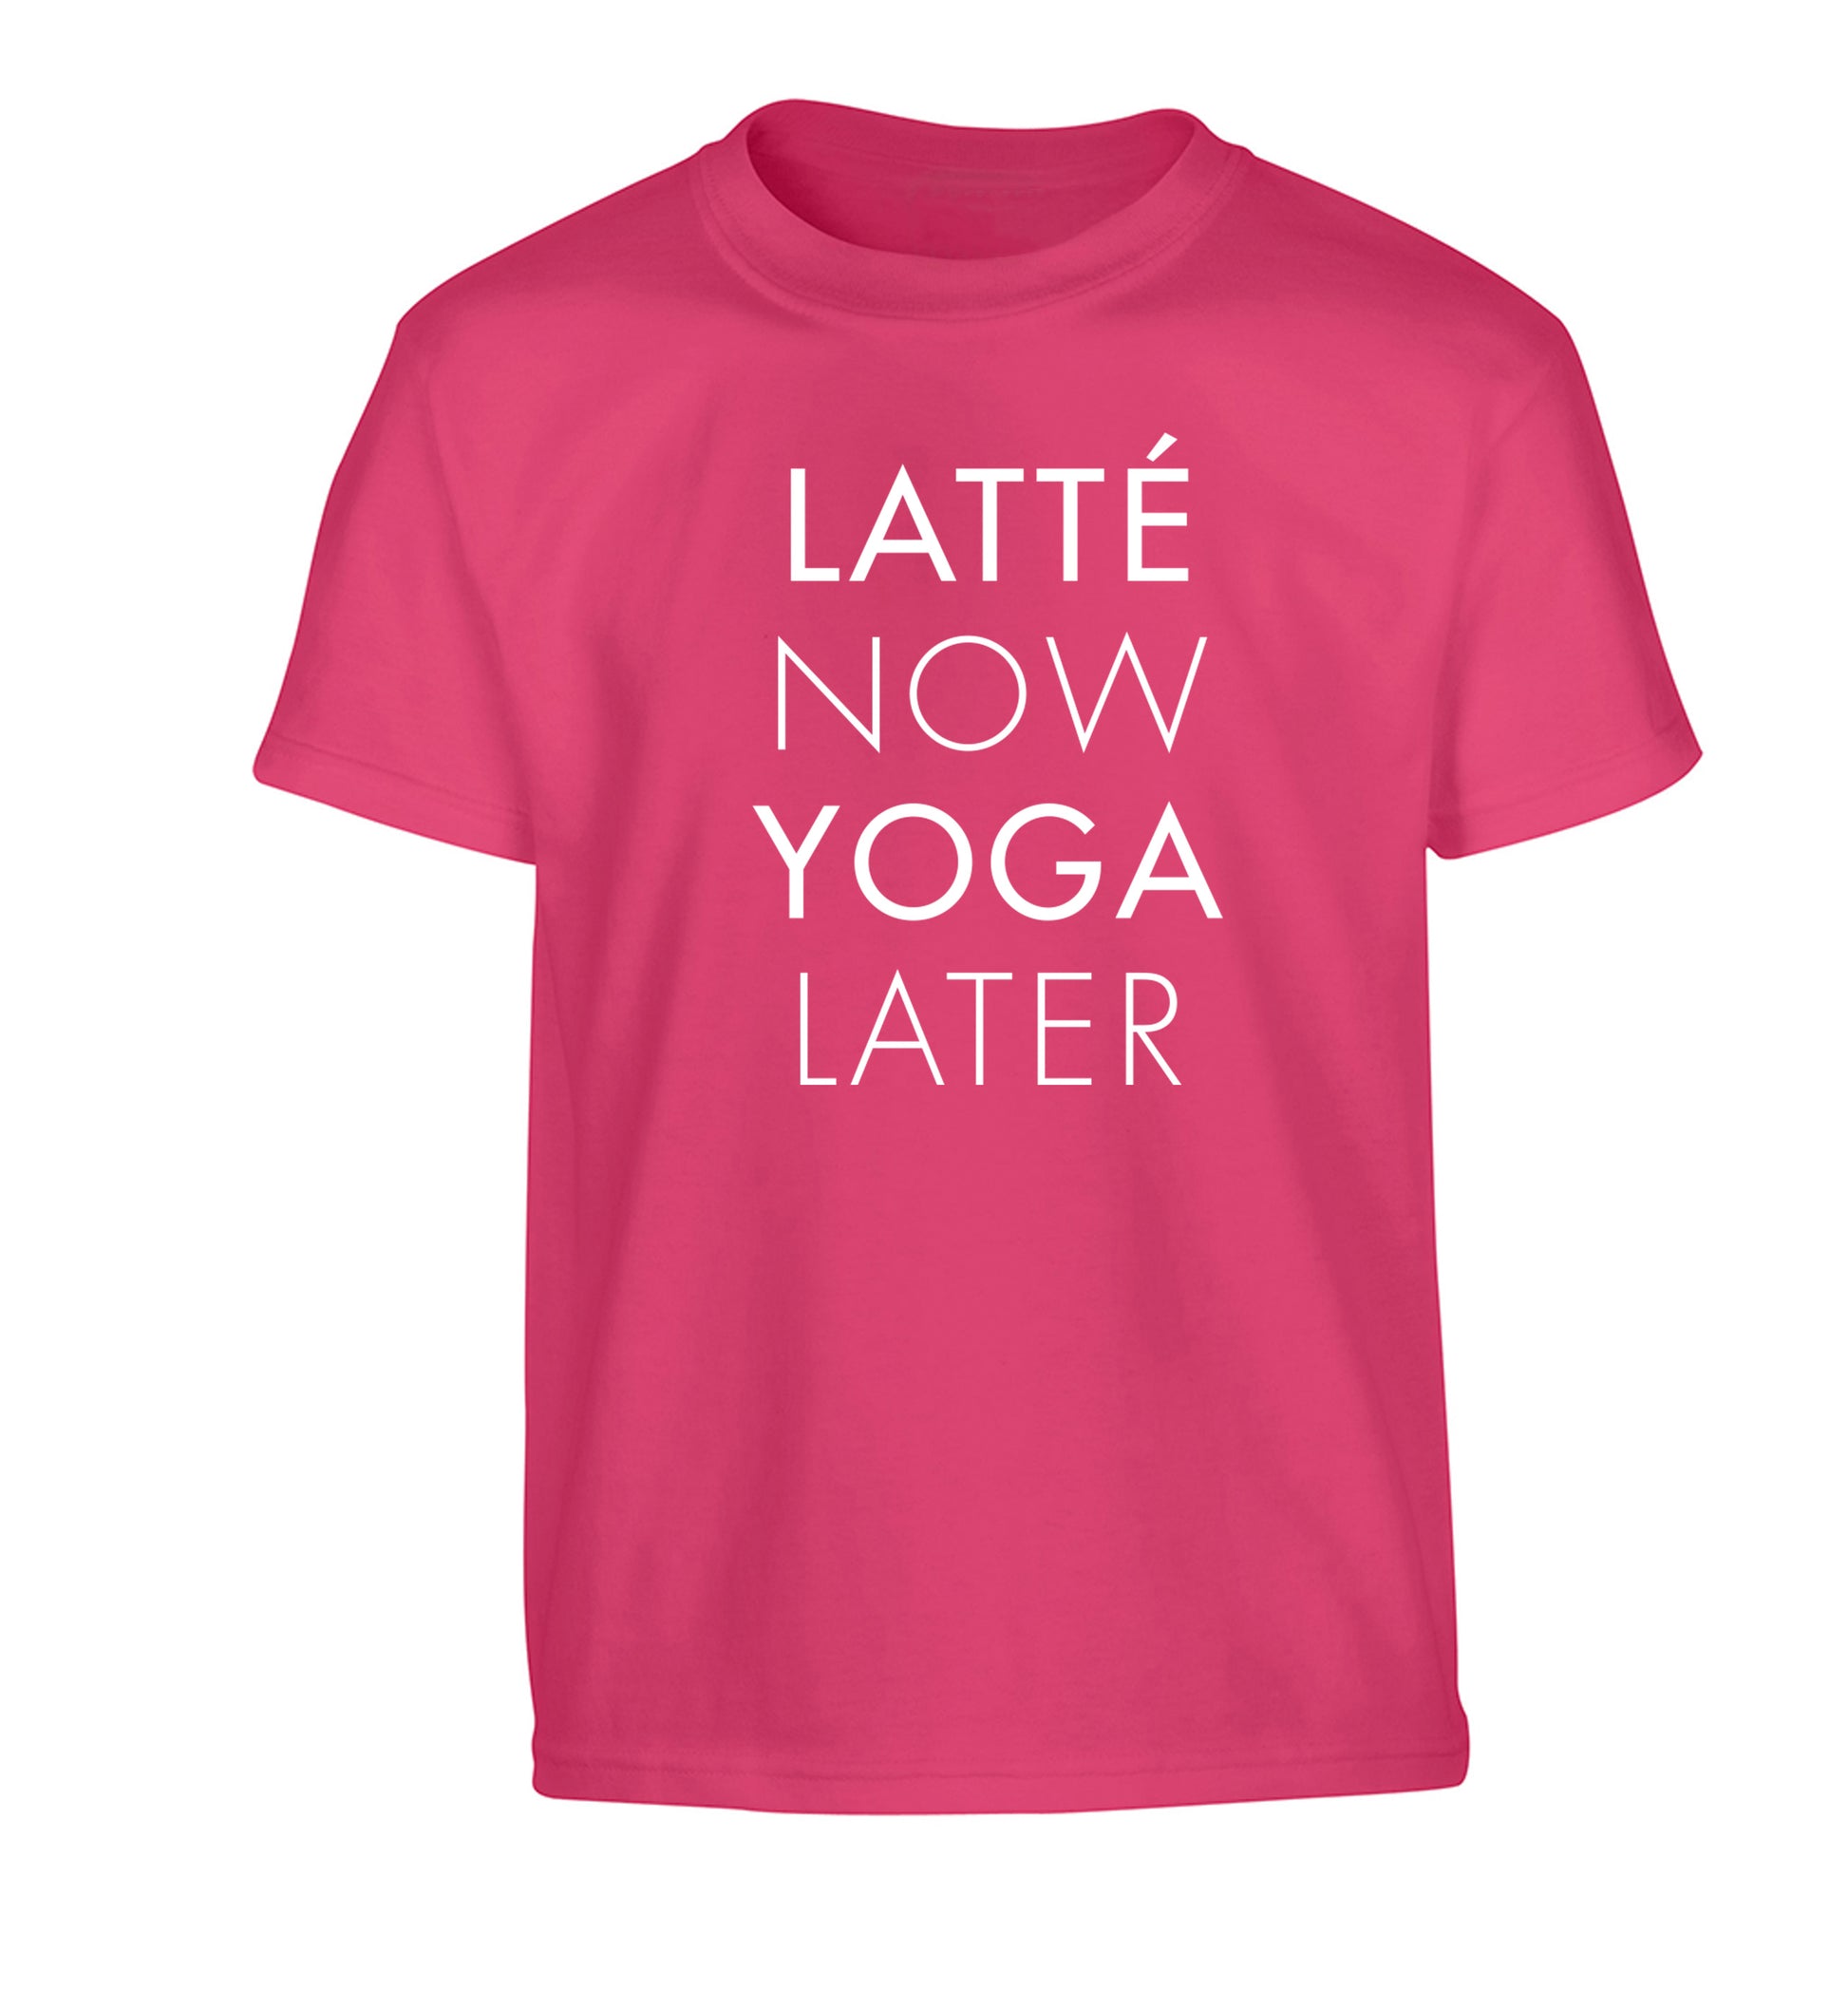 Latte now yoga later Children's pink Tshirt 12-14 Years